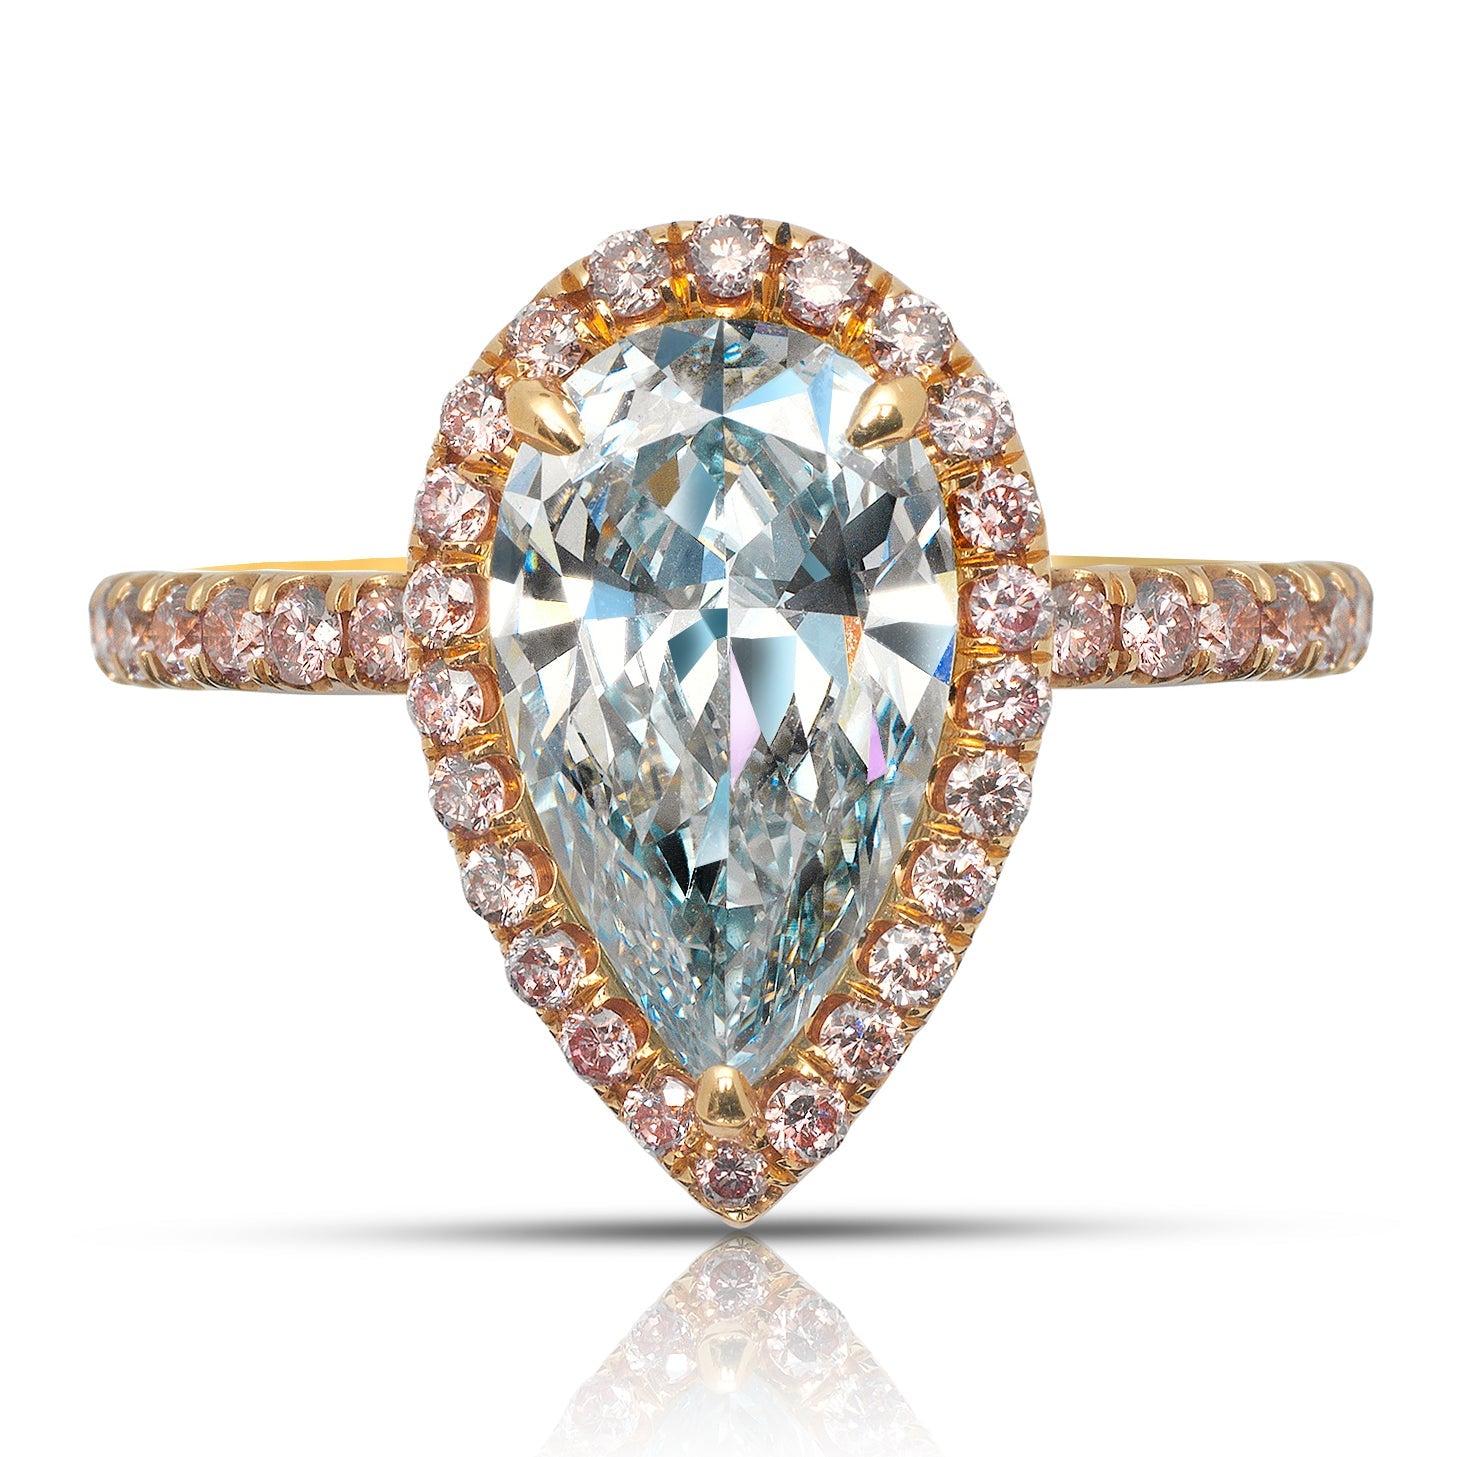 MERR - PEAR SHAPE FANCY INTENSE GREEN BLUE DIAMOND ENGAGEMENT RING BY MIKE NEKTA
GIA CERTIFIED

Center Diamond
Carat Weight: 2 Carats
Color : FANCY INTENSE GREEN BLUE FIGB*
Clarity: VVS1
Style: PEAR BRIILLIANT
Approximate Measurements: 12.1 x 7.1 x